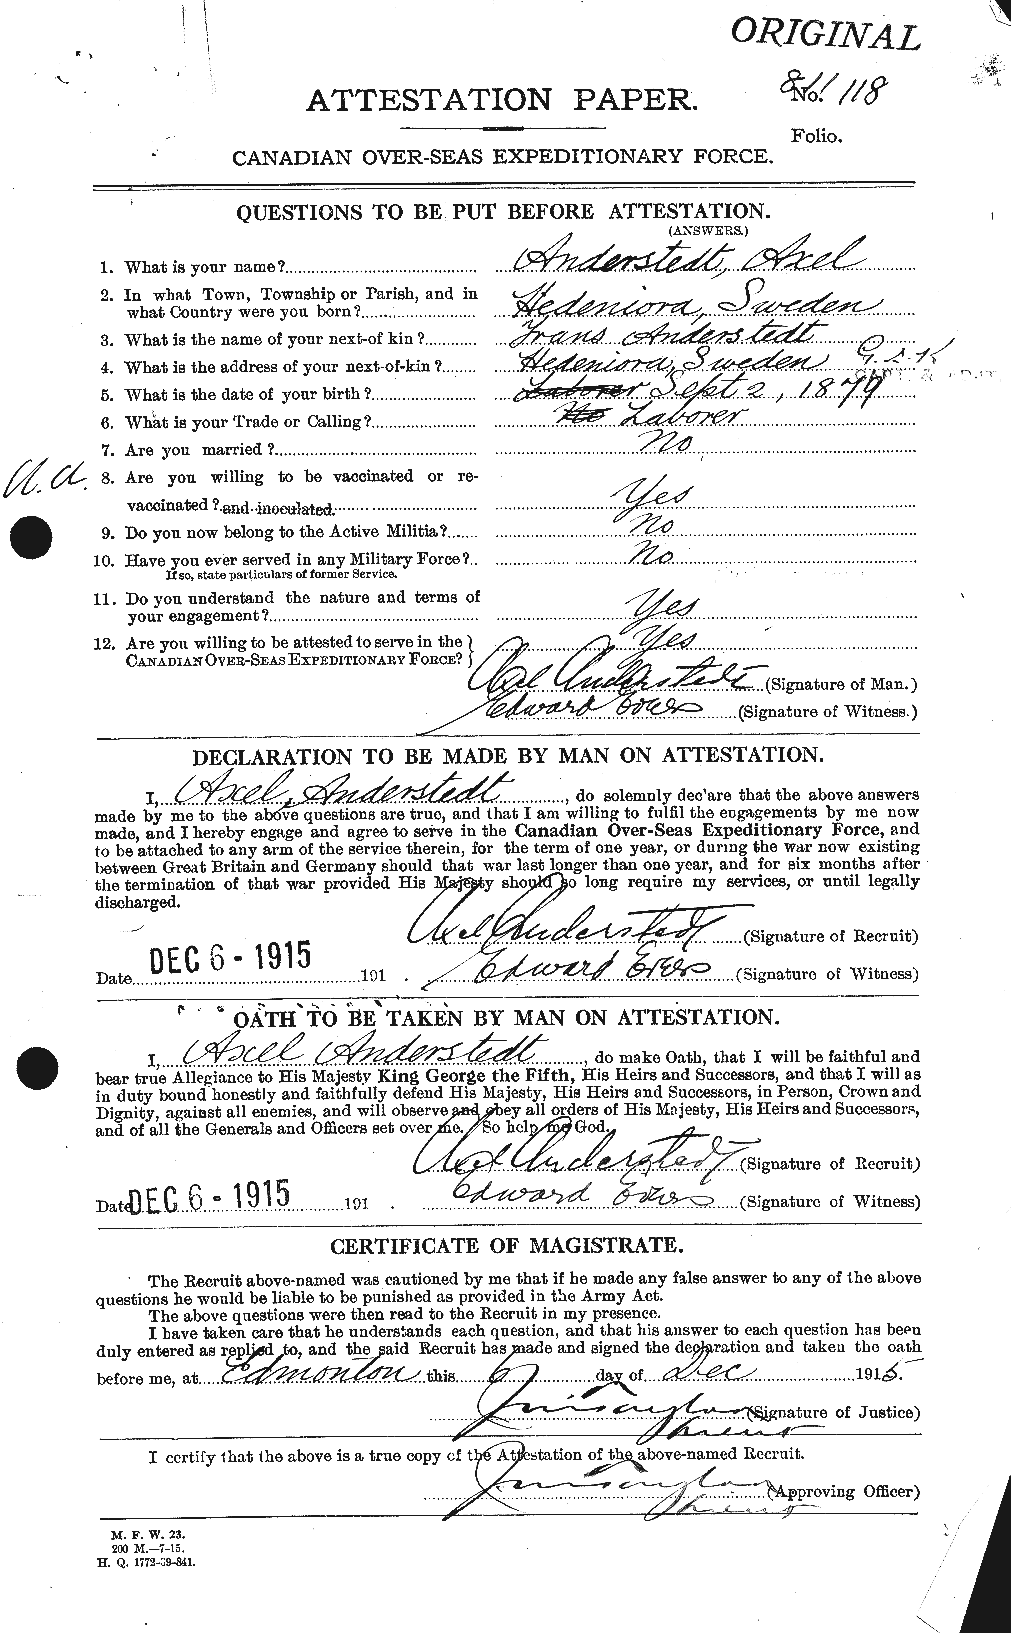 Personnel Records of the First World War - CEF 210644a